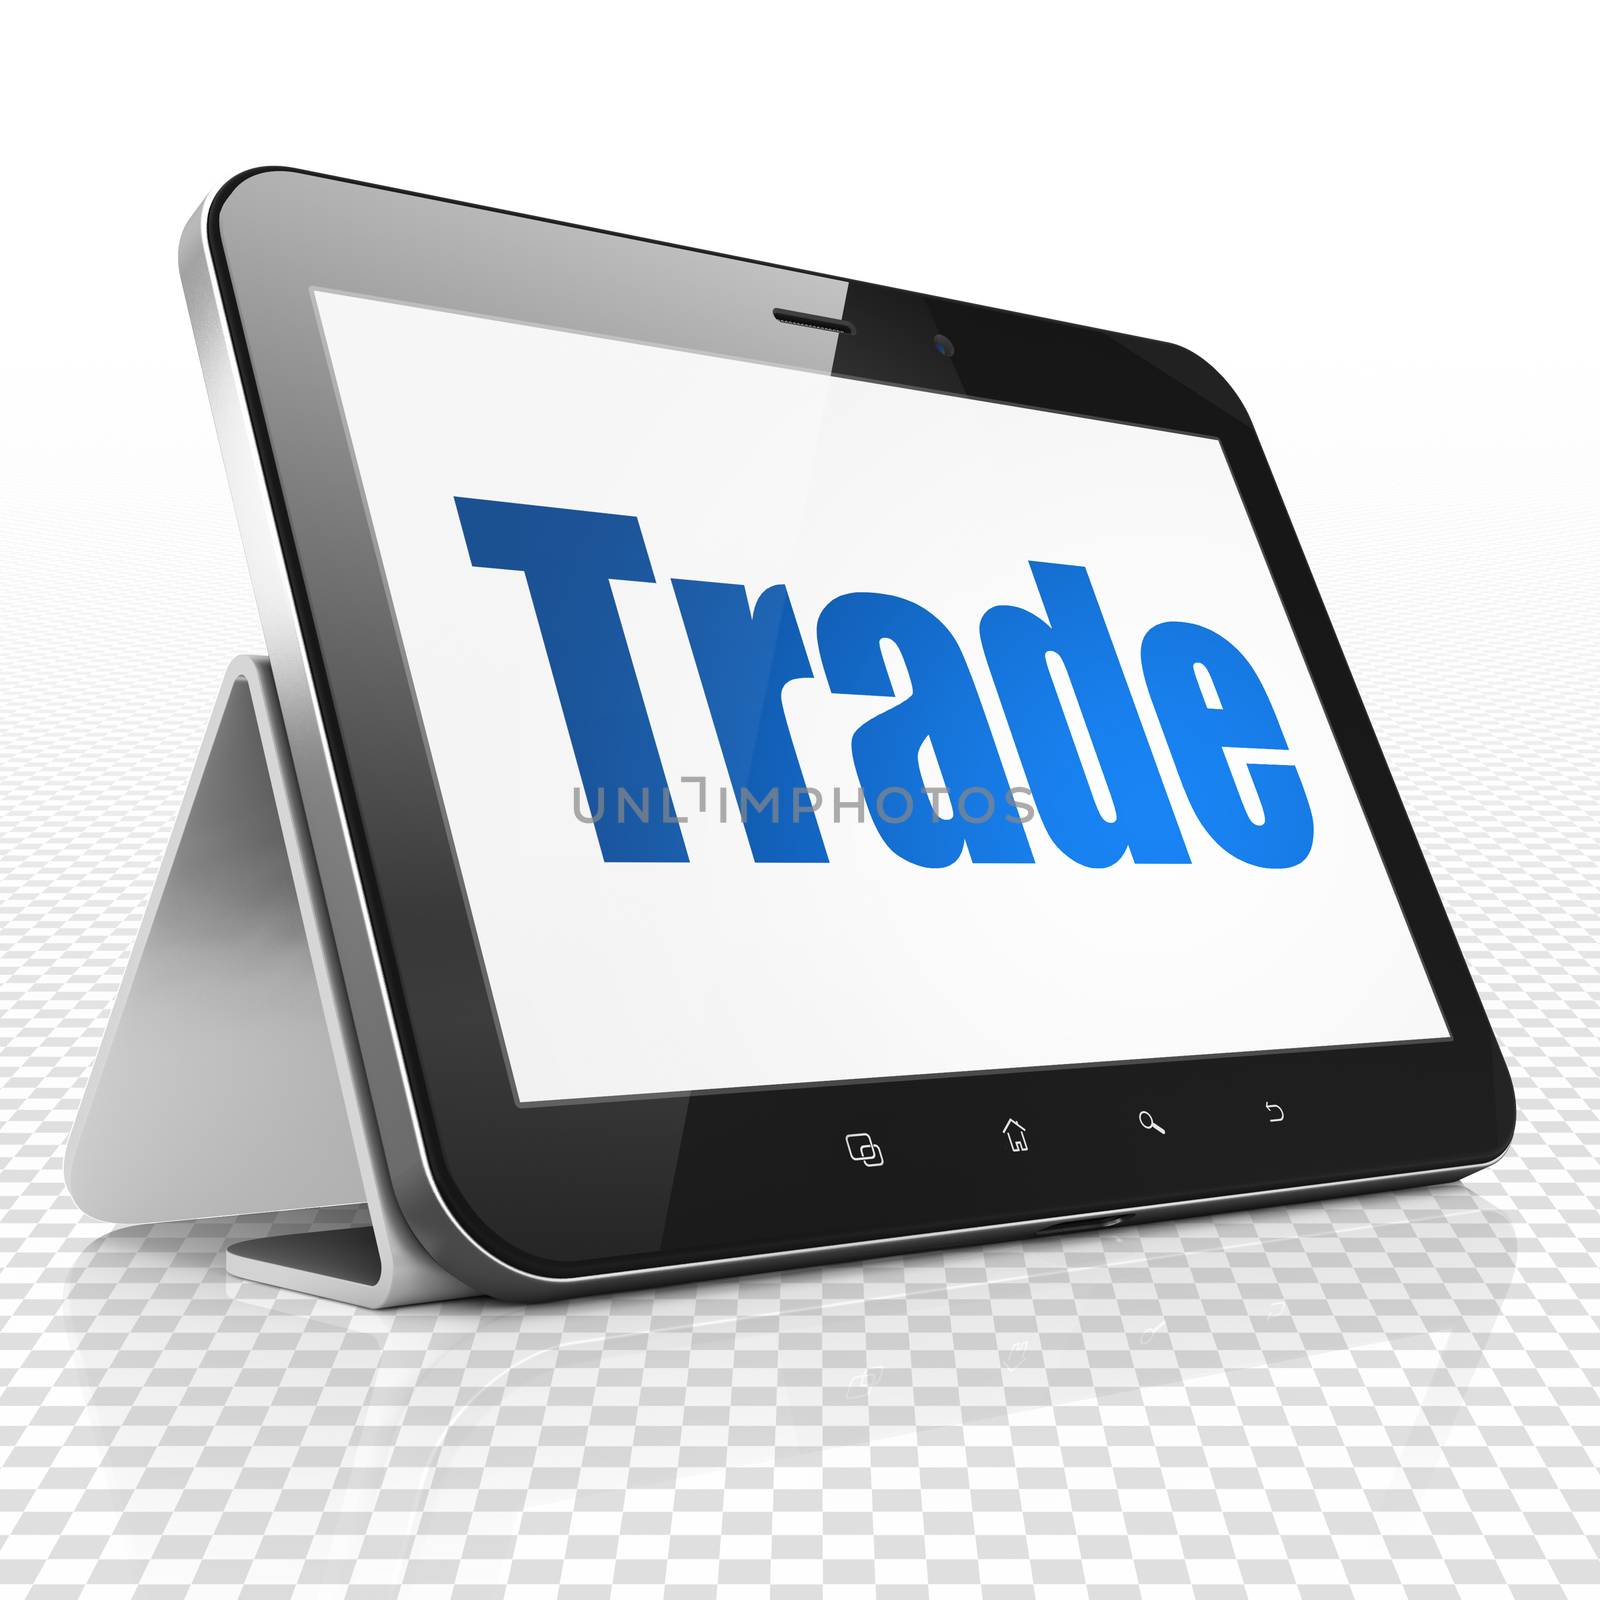 Business concept: Tablet Computer with blue text Trade on display, 3D rendering